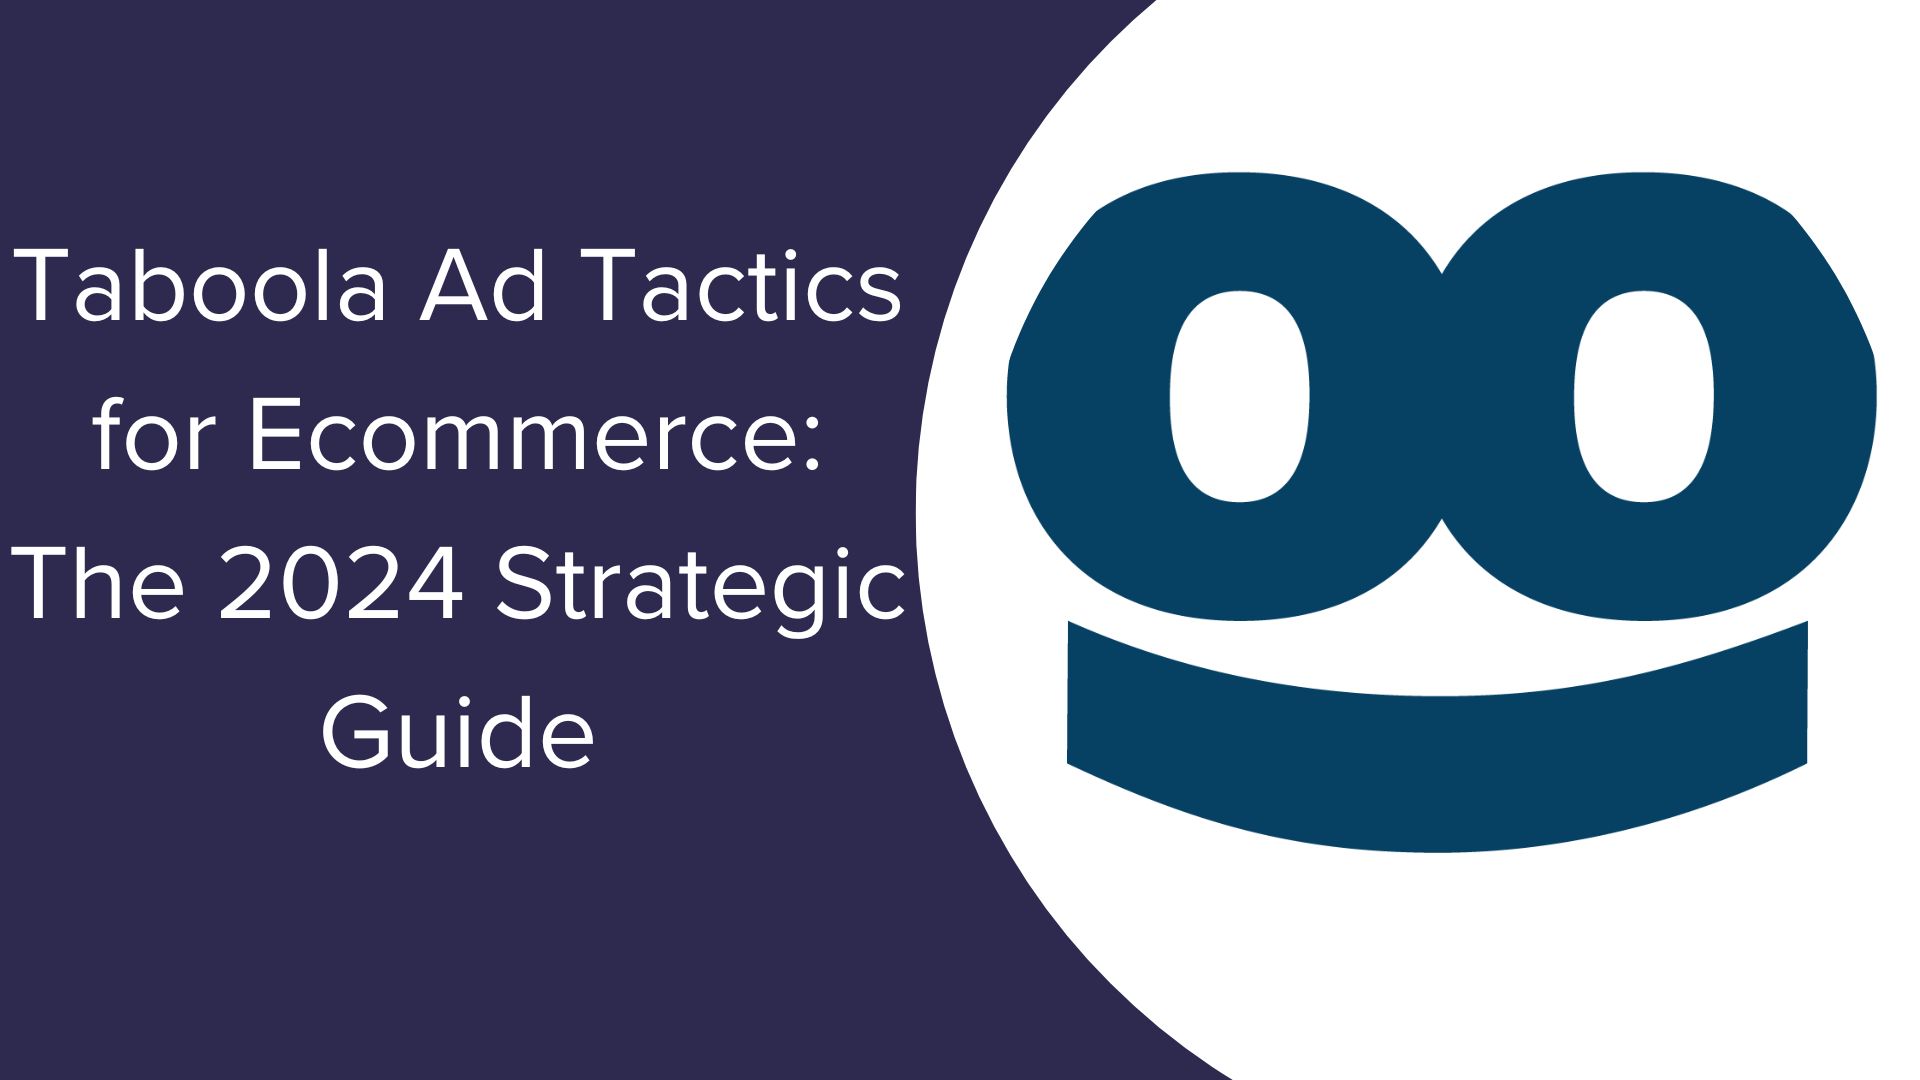 Taboola Ad Tactics for Ecommerce: The 2024 Strategic Guide